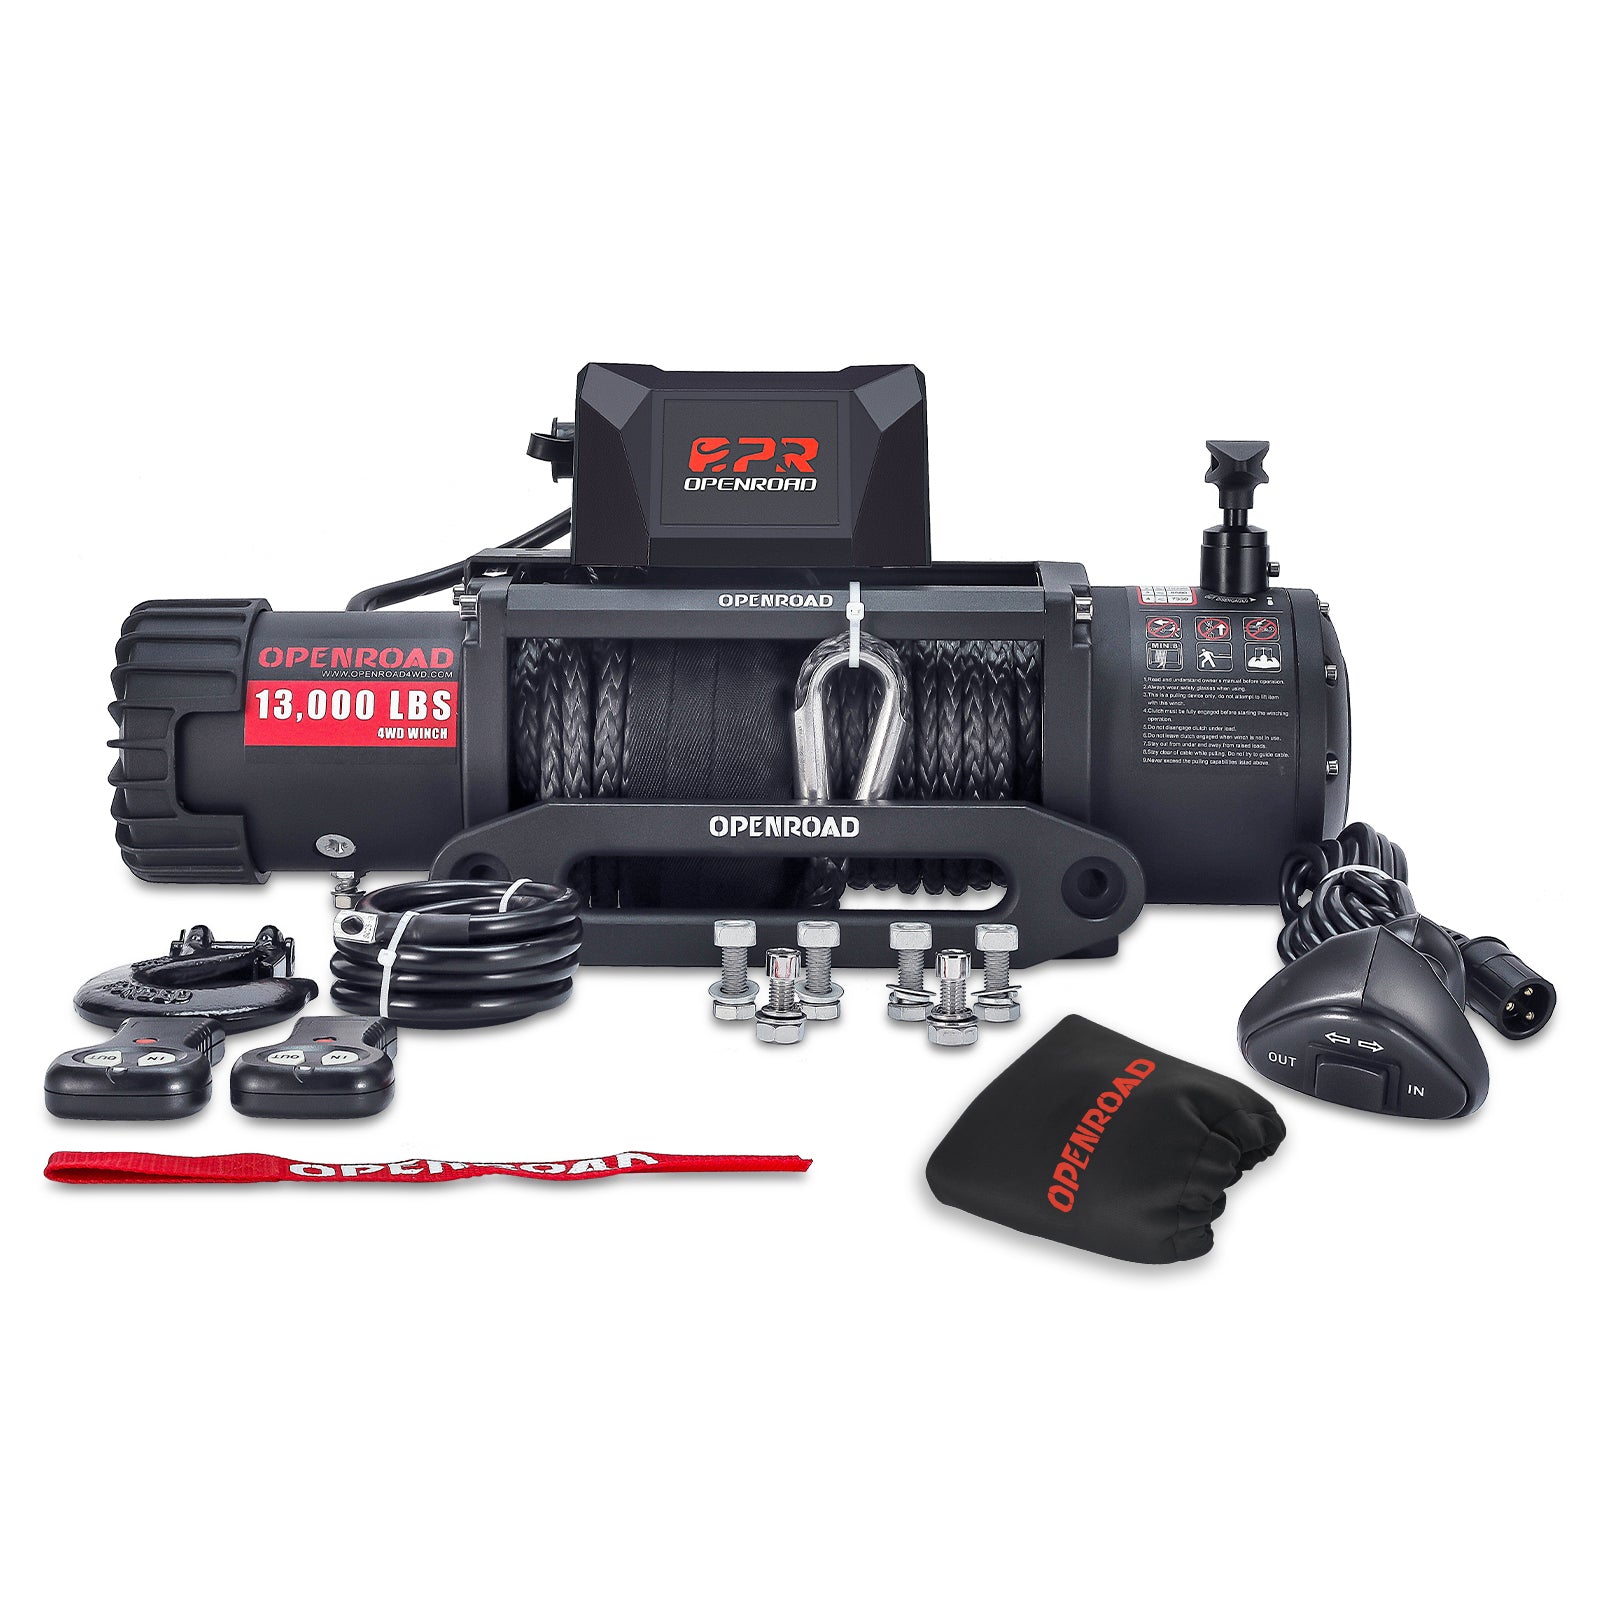 OPENROAD 13,000 lbs winch with synthetic rope and 2 wireless remote controllers - Panther Series 2S, compatible with the front bumper designed for a 12,000 lbs winch winch OPENROAD 13000lbs Add cover  